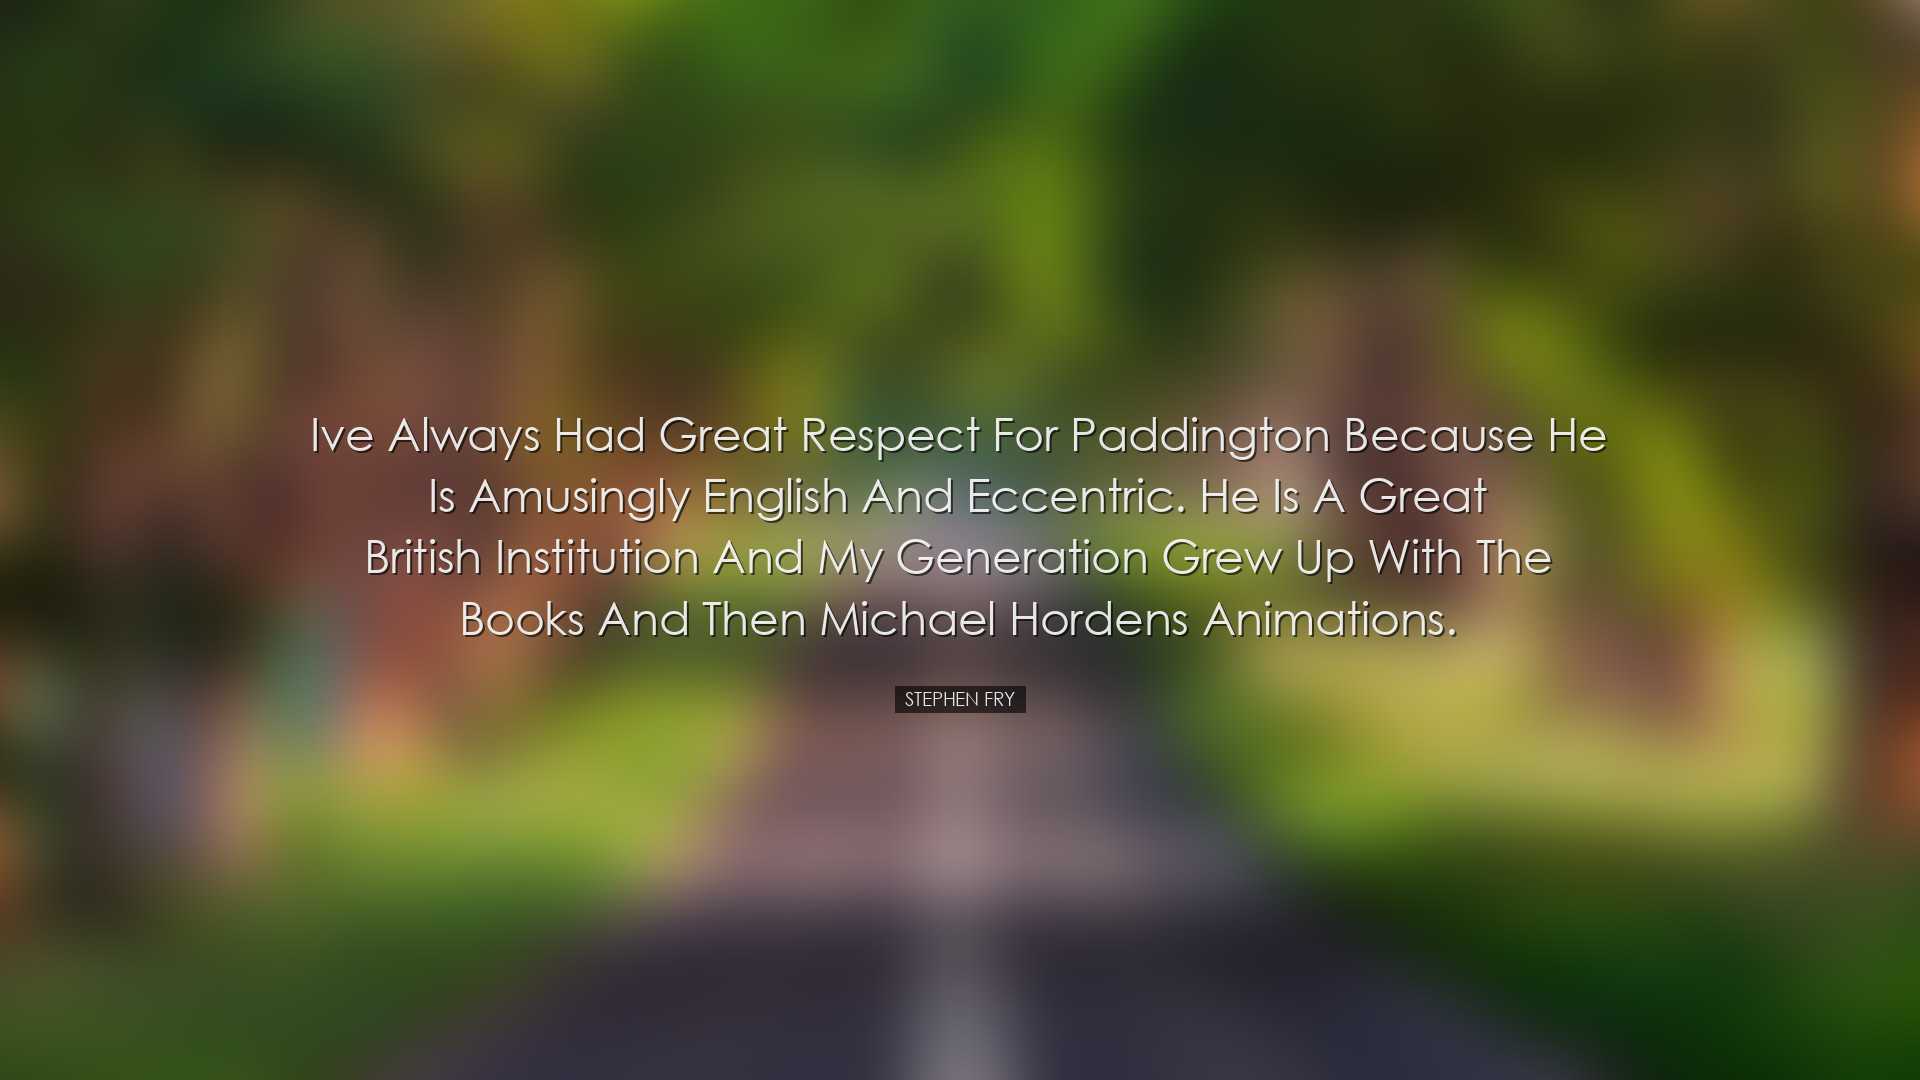 Ive always had great respect for Paddington because he is amusingl